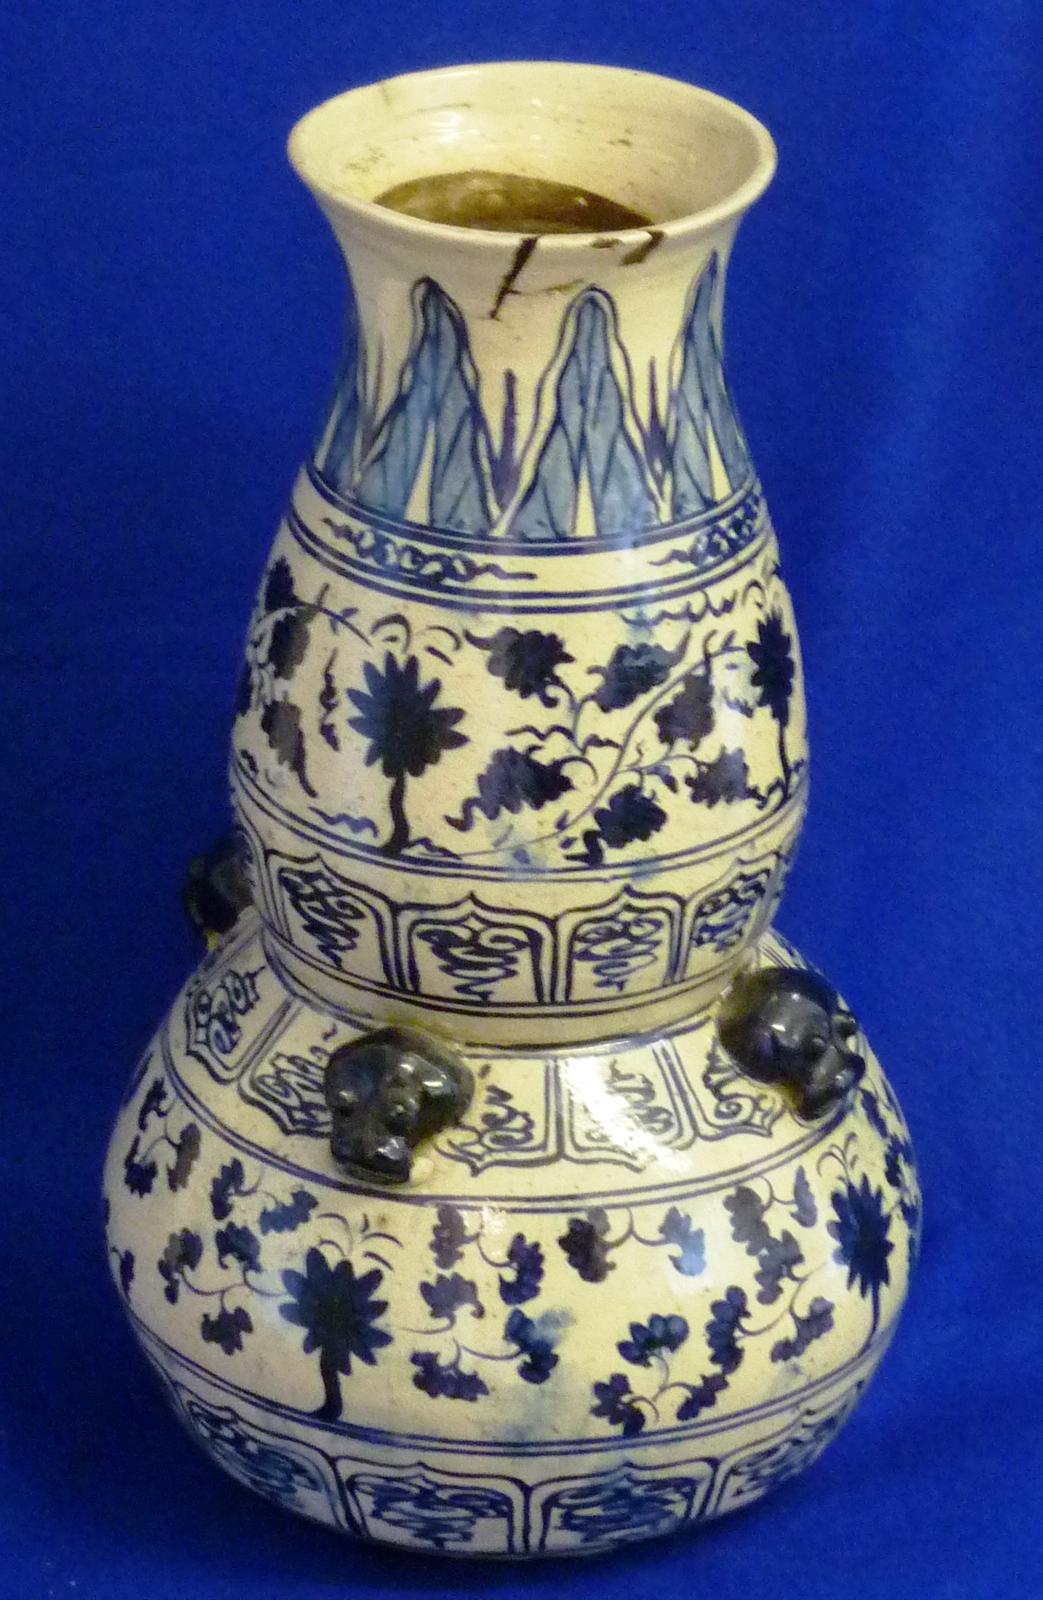 A large South East Asian Annamese (15th - 16th Century)  Blue and White Double Gourd Vase with